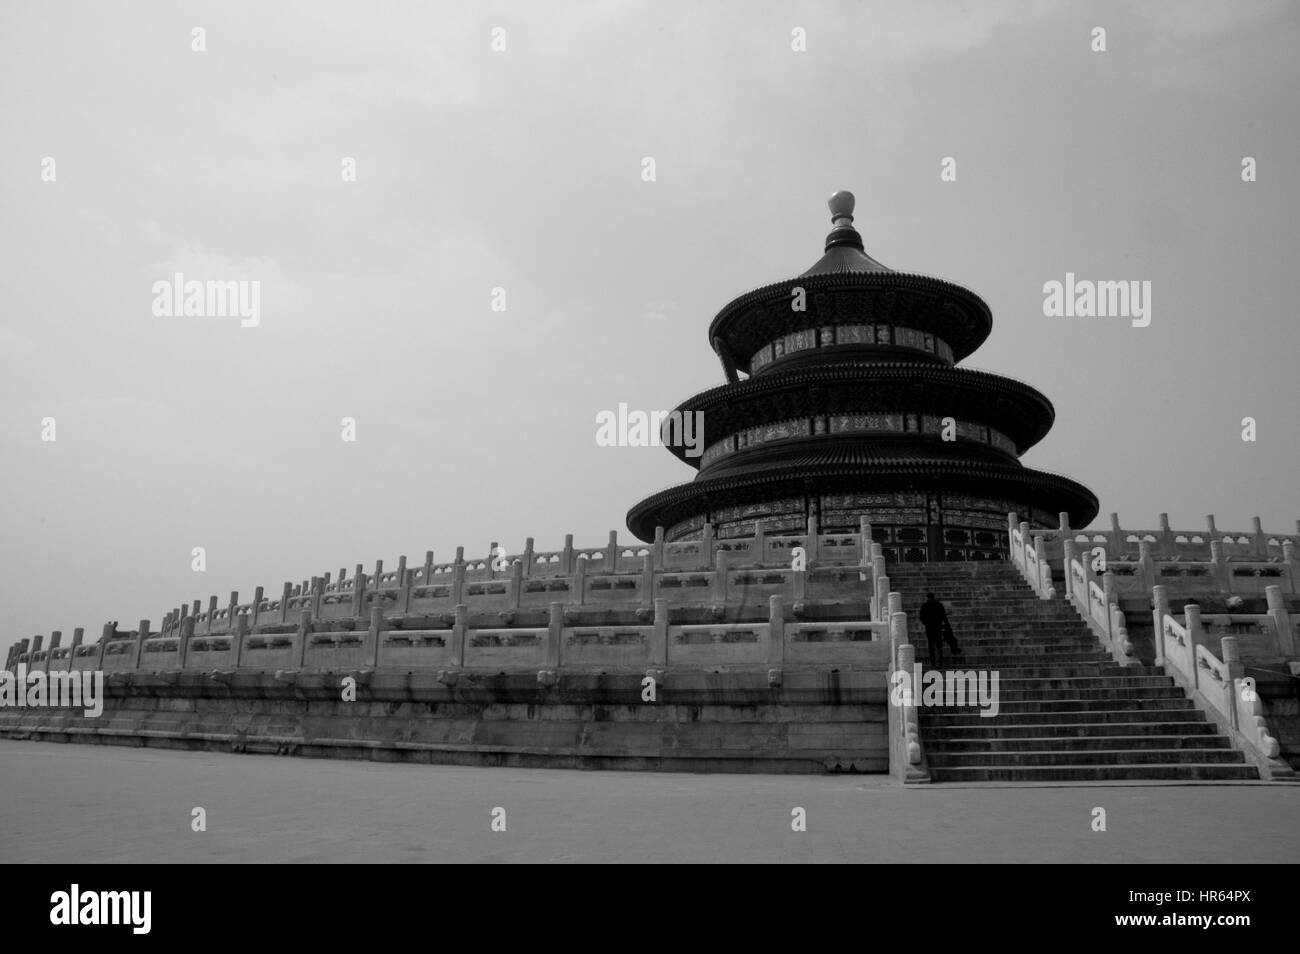 Cctv building beijing Black and White Stock Photos & Images - Alamy